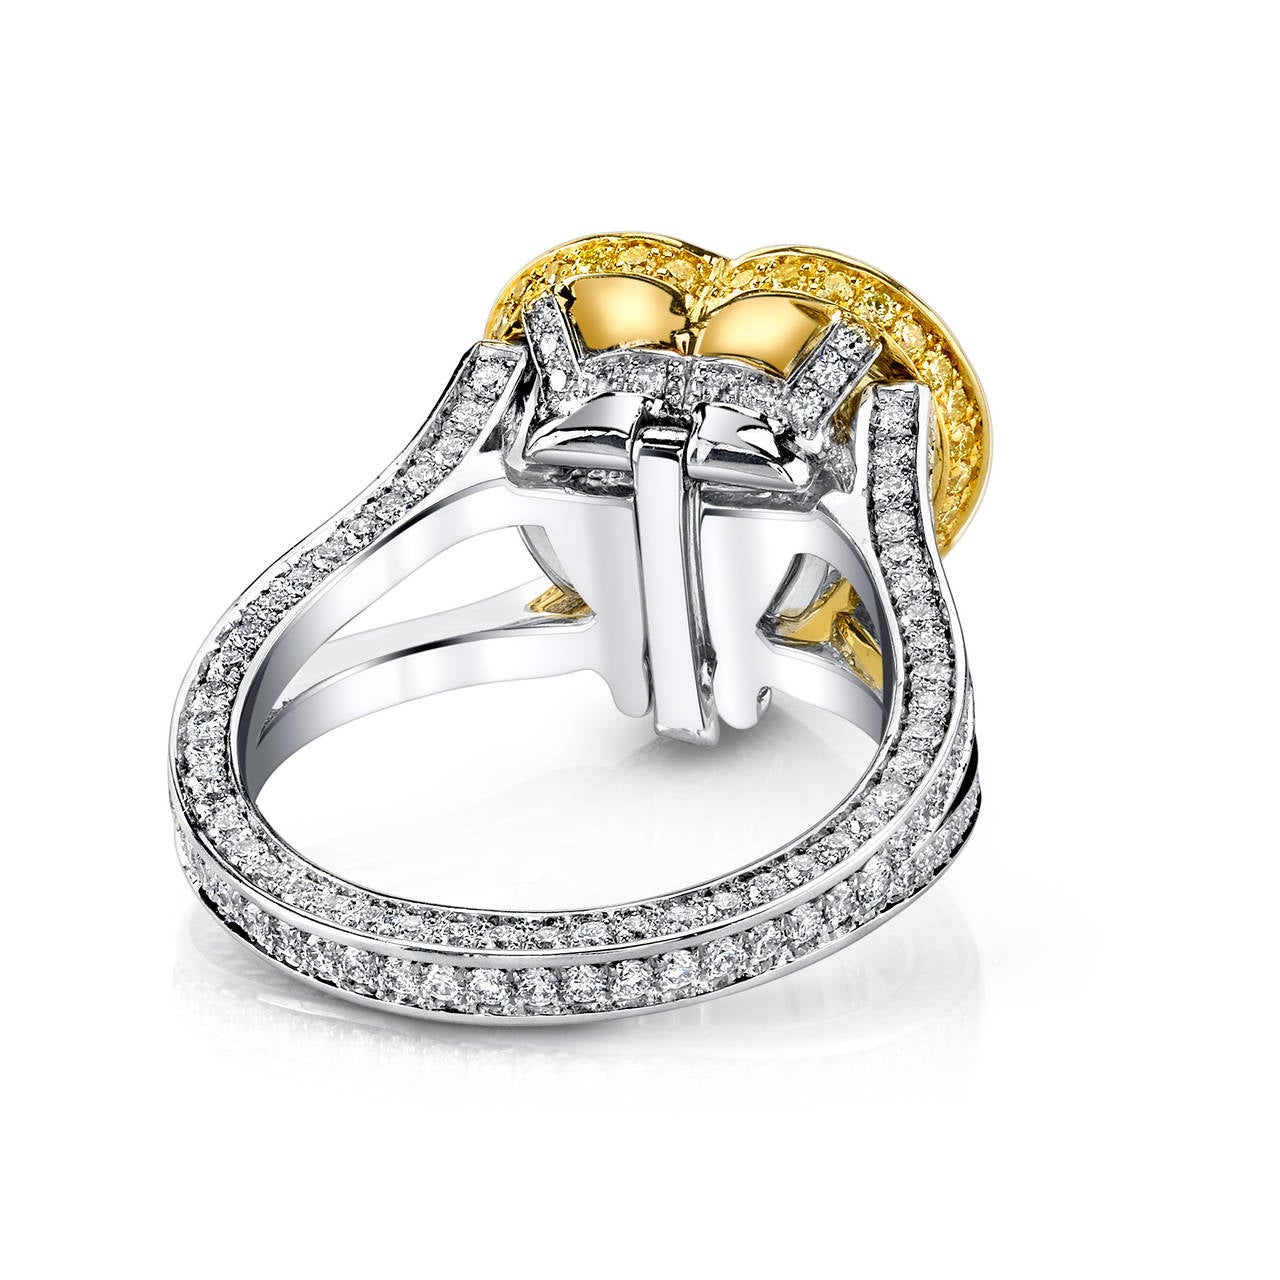 Heart Shaped, GIA Certified Fancy Light Yellow 4.41 CT Diamond set in 18 Karat White Gold and Platinum. Accented with 2.00 CT White F/VS2 Ideal Cut Diamonds and Vivid Yellow Diamonds. 18 Karat White Gold 18" Included.

This ring easily